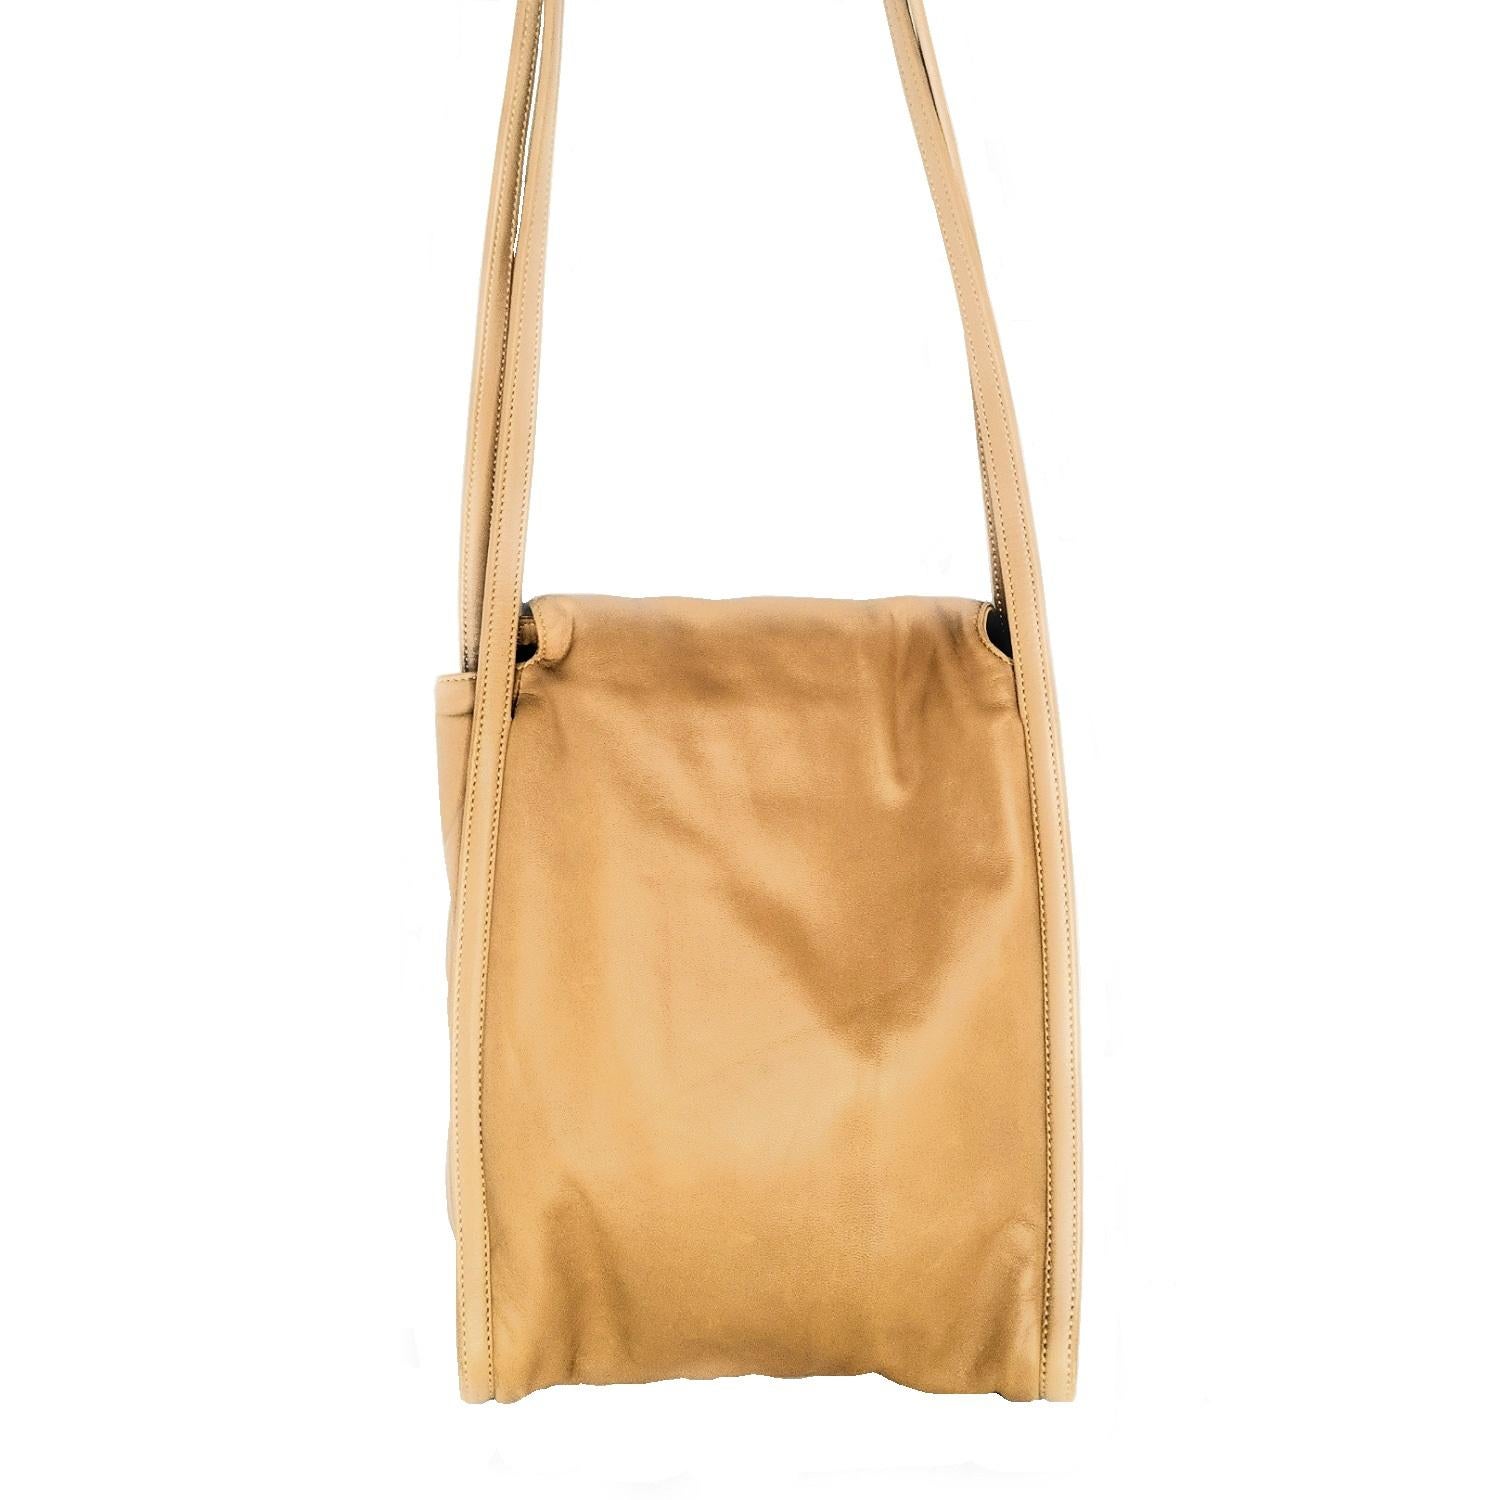 Caramel Nappa leather Loewe shoulder bag made of soft grained leather; gold-tone hardware; jacquard logo print textile interior lining housing a single zipped pocket. Fold-over Flap with magnetic closure. Made in Spain. Comes with Loewe dust